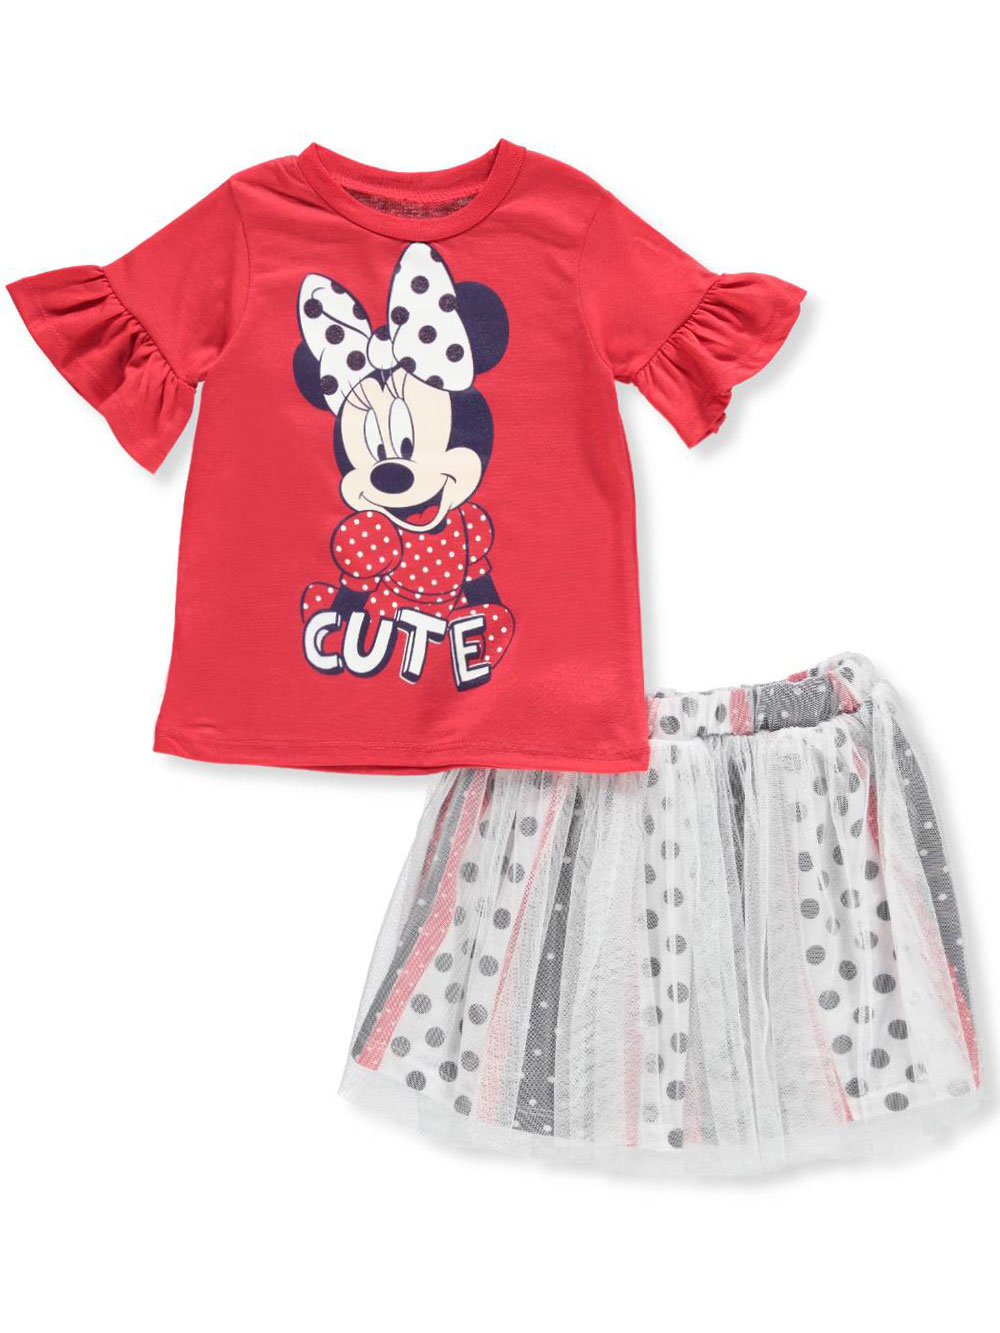 Minnie Mouse 2 Piece Skirt Set Outfit By Disney In Redwhite